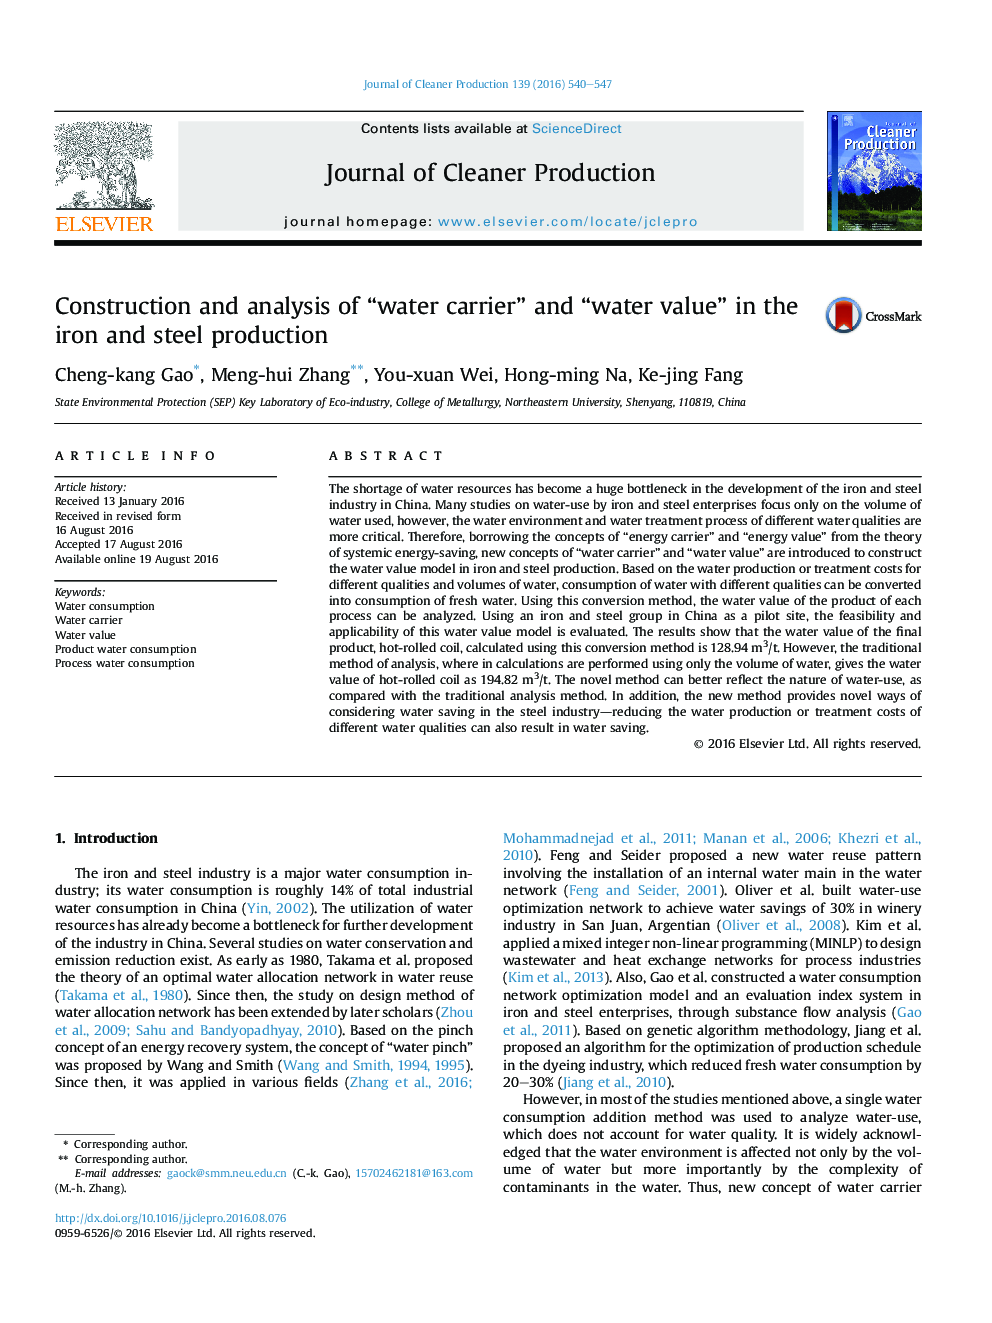 Construction and analysis of “water carrier” and “water value” in the iron and steel production